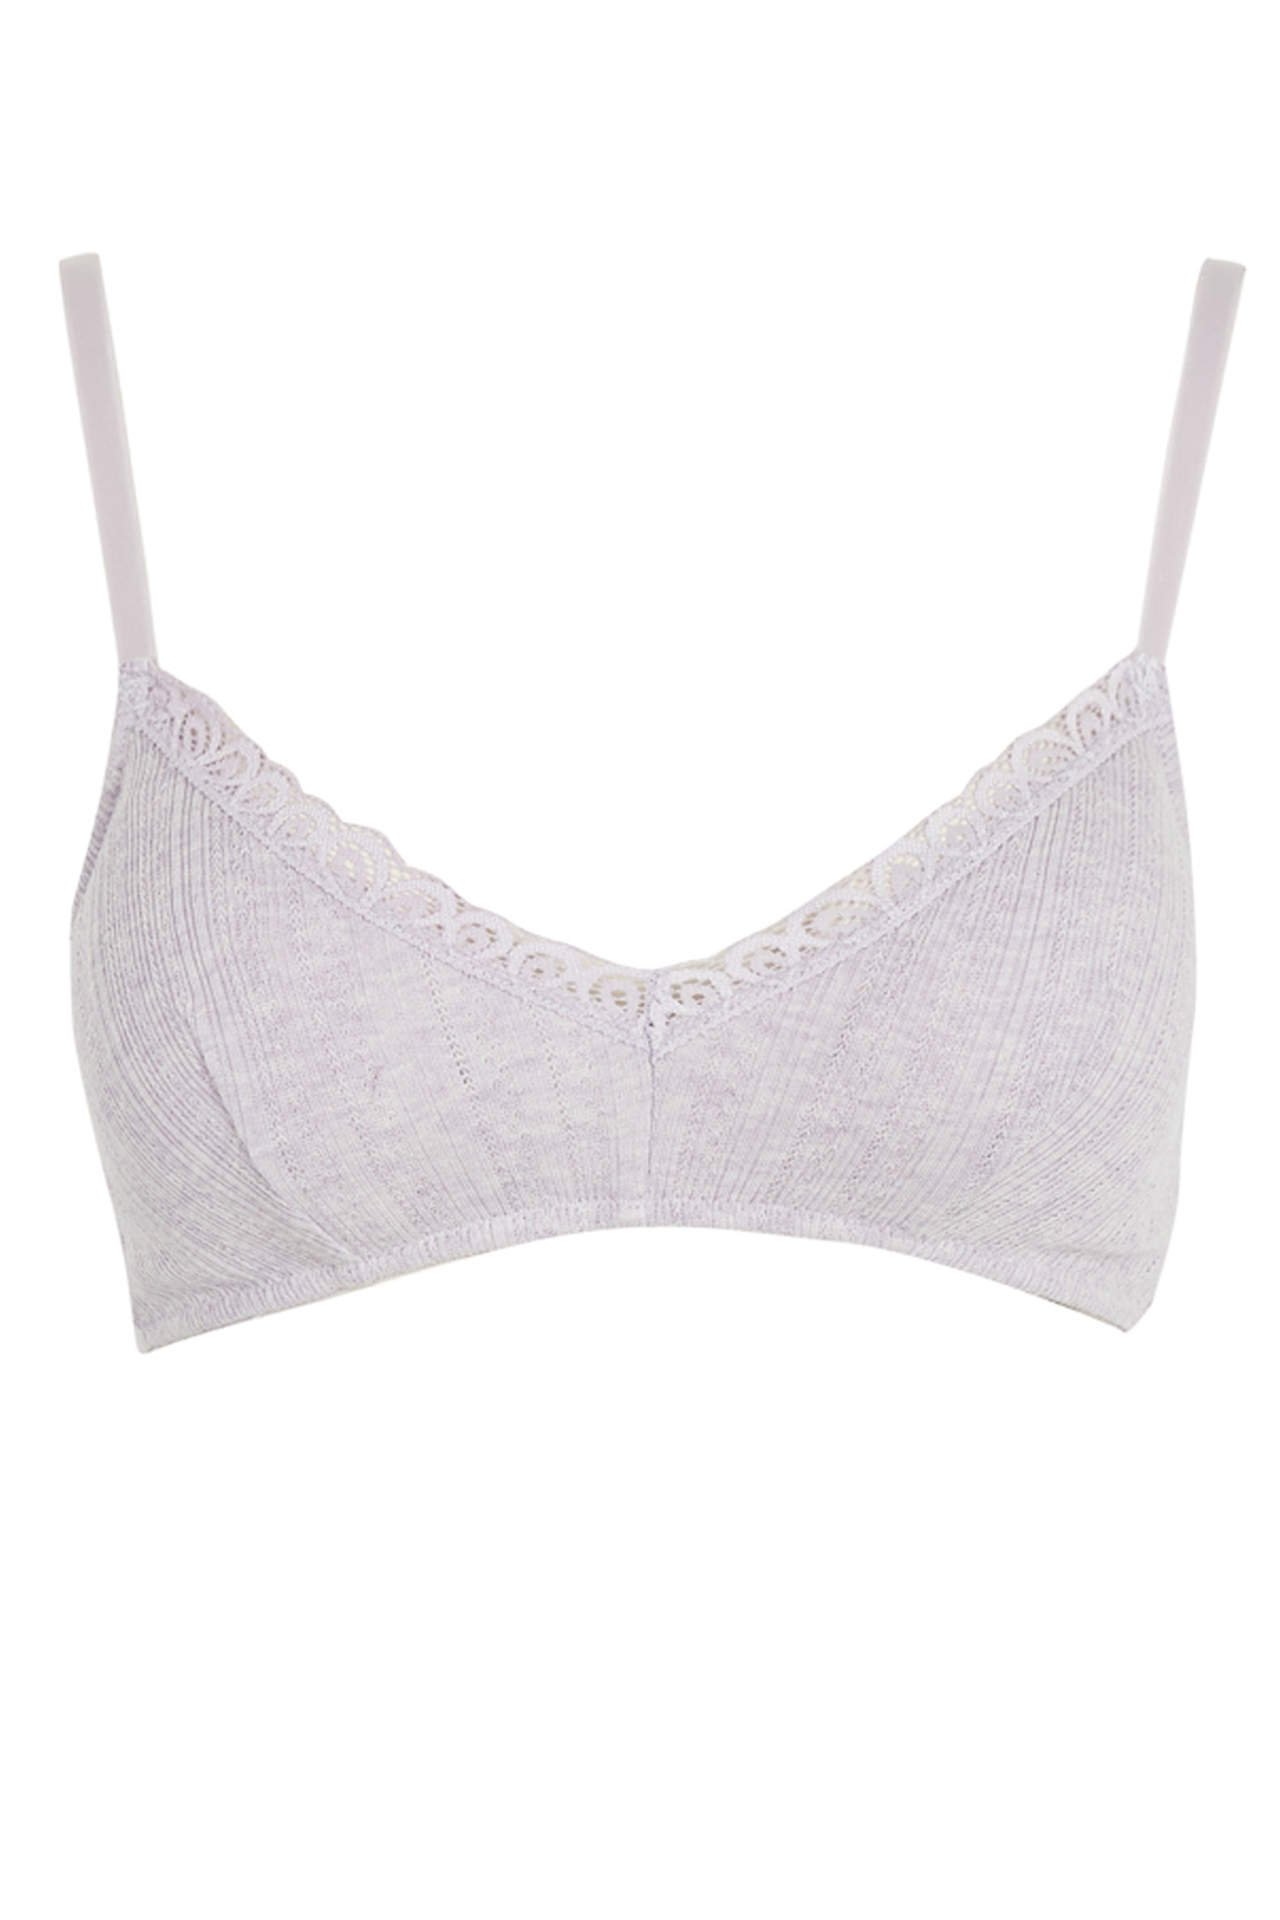 DEFACTO Fall In Love Lace Triangle Bralet